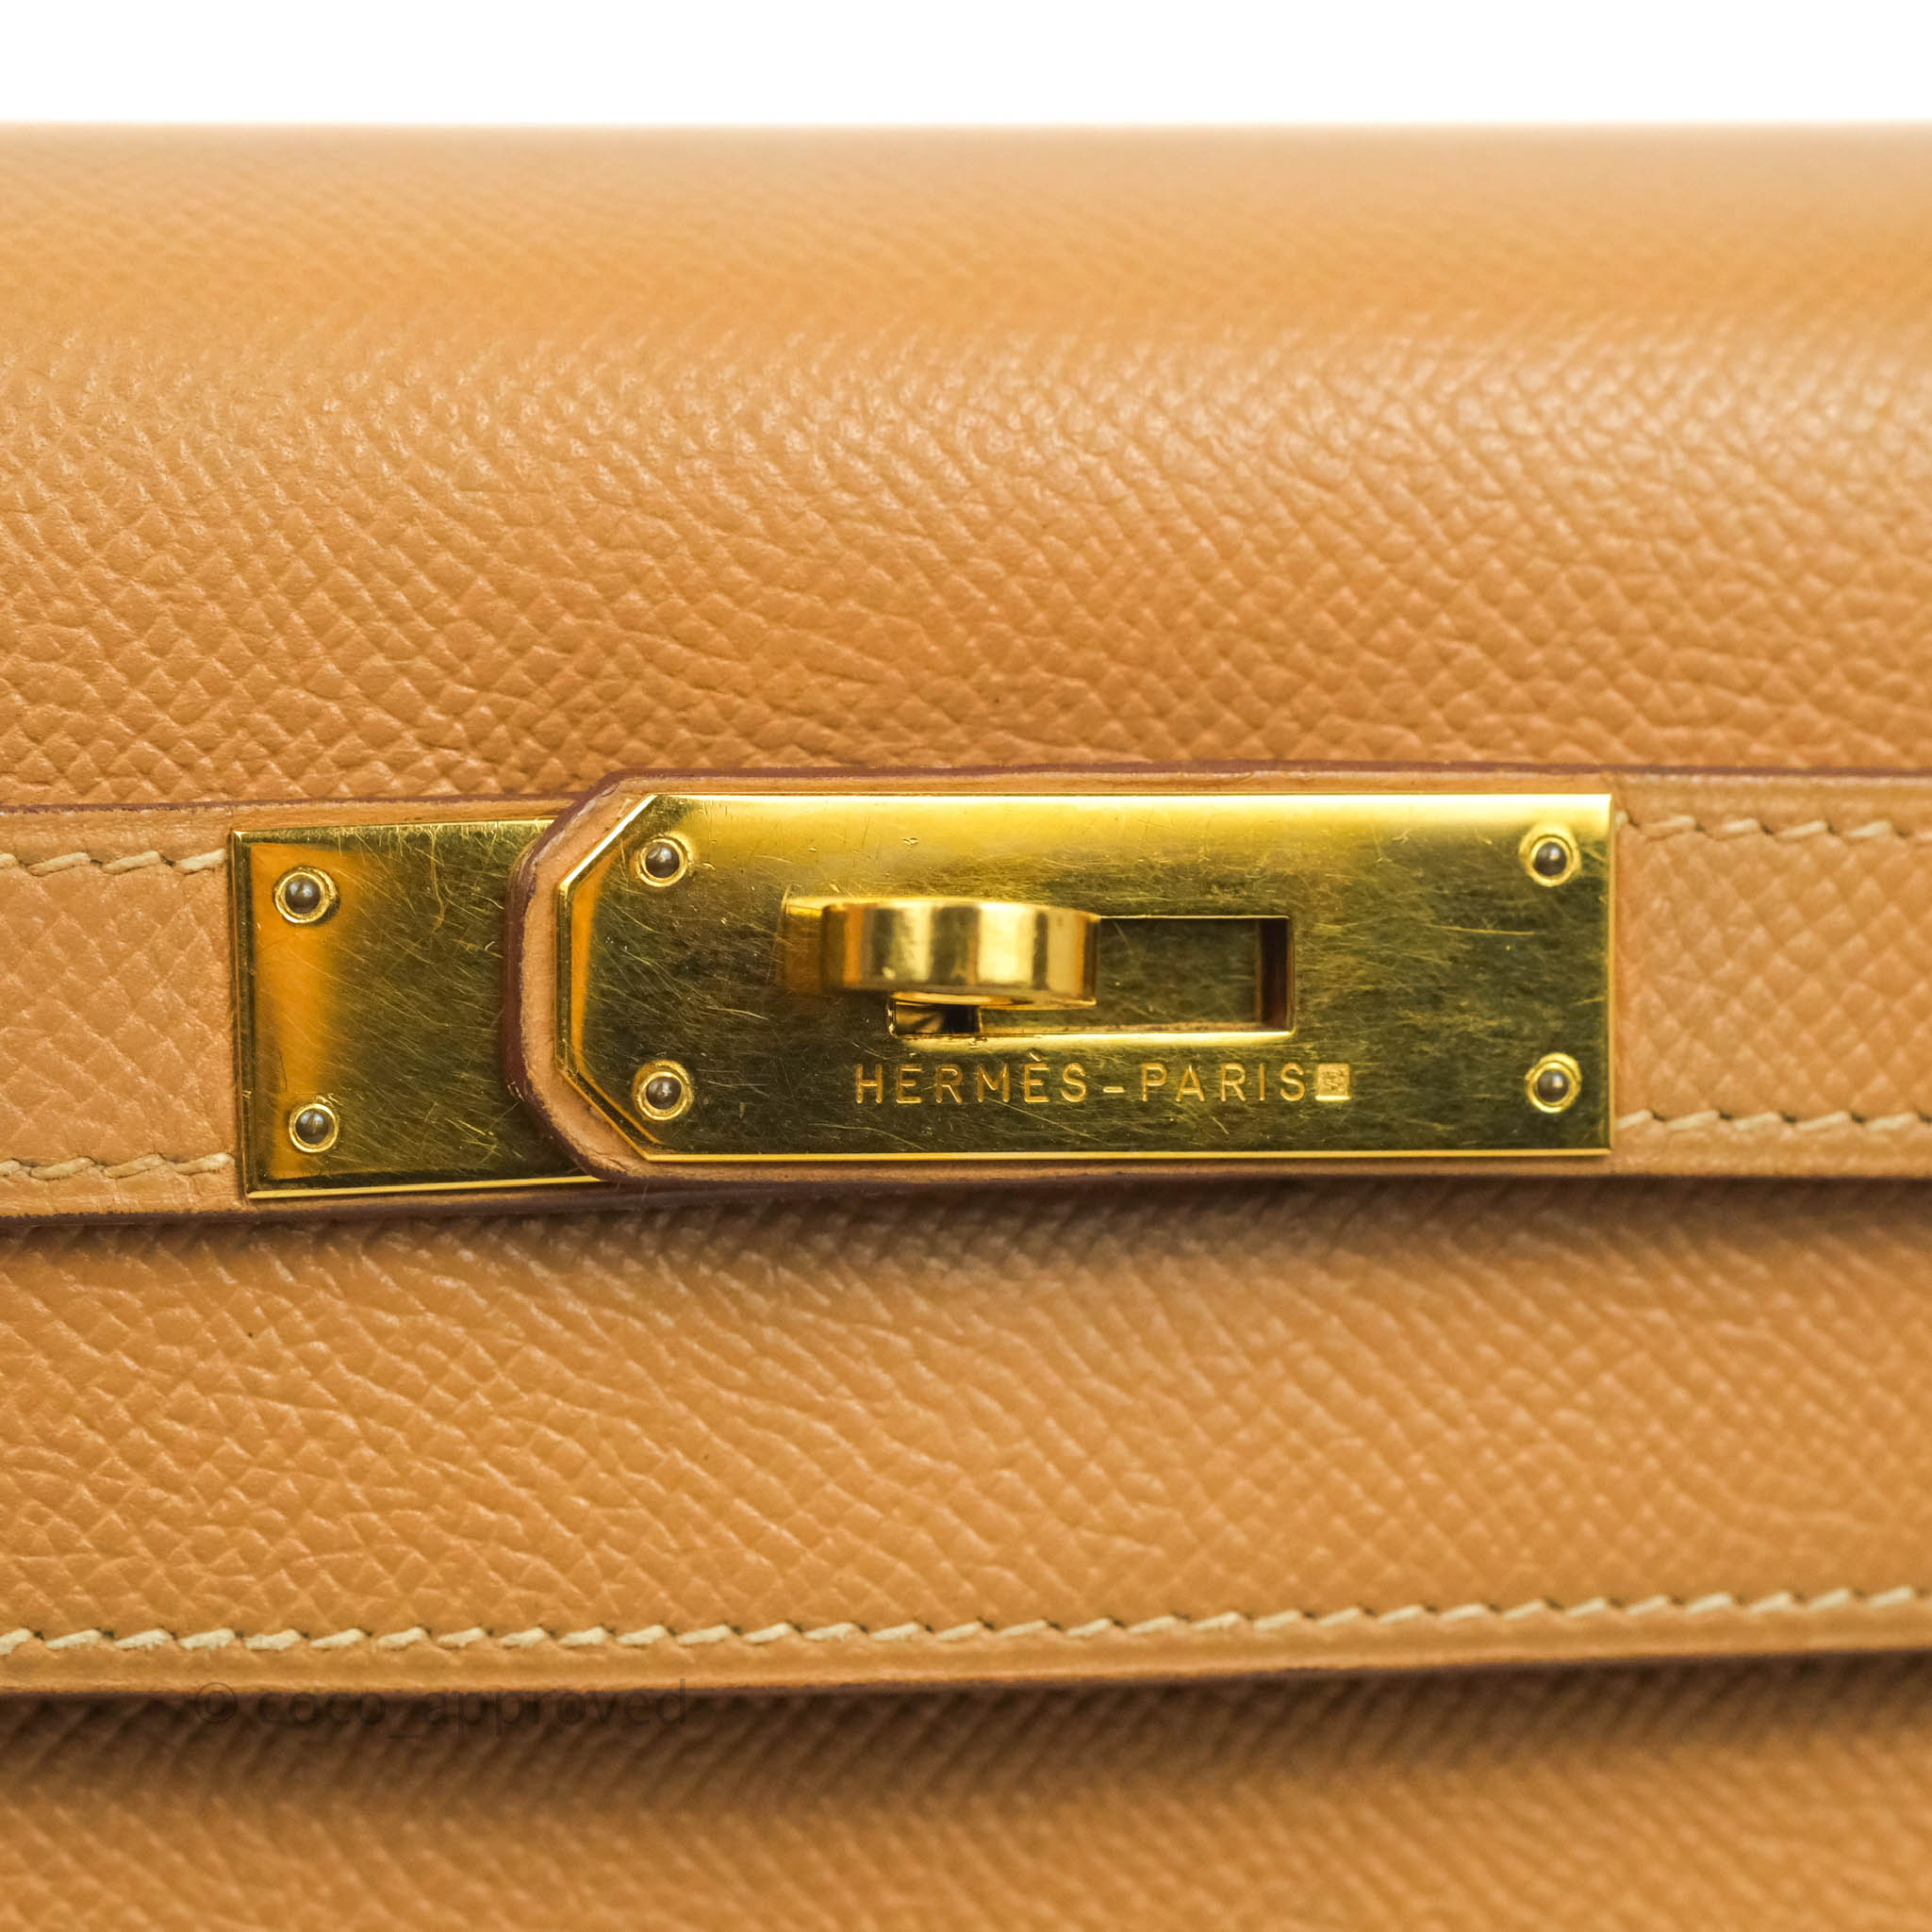 Vintage Hermes Kelly Bag 35 (Gold Courchevel Leather with GHW)